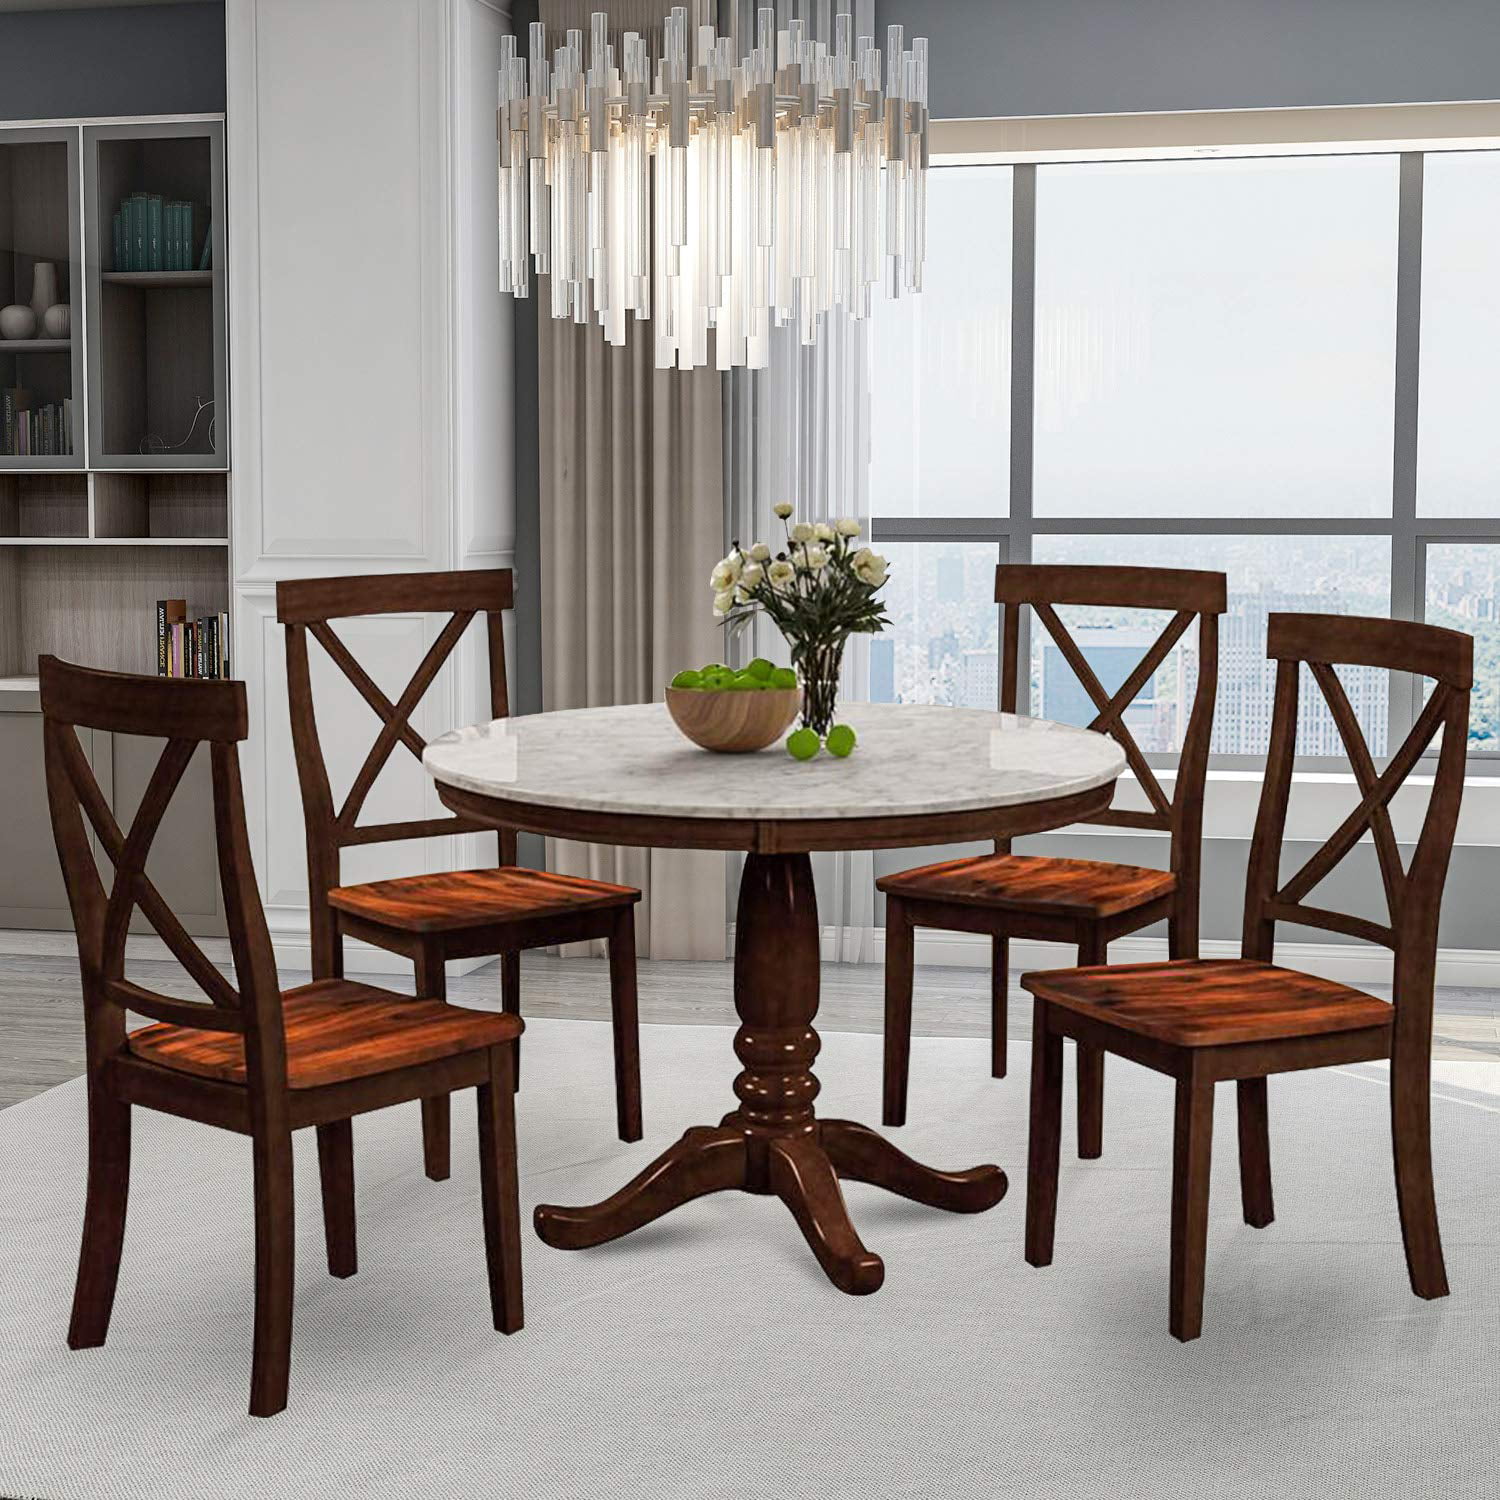 Round Dining Table And Chair Set, Round Dining Table With 4 Chairs Set